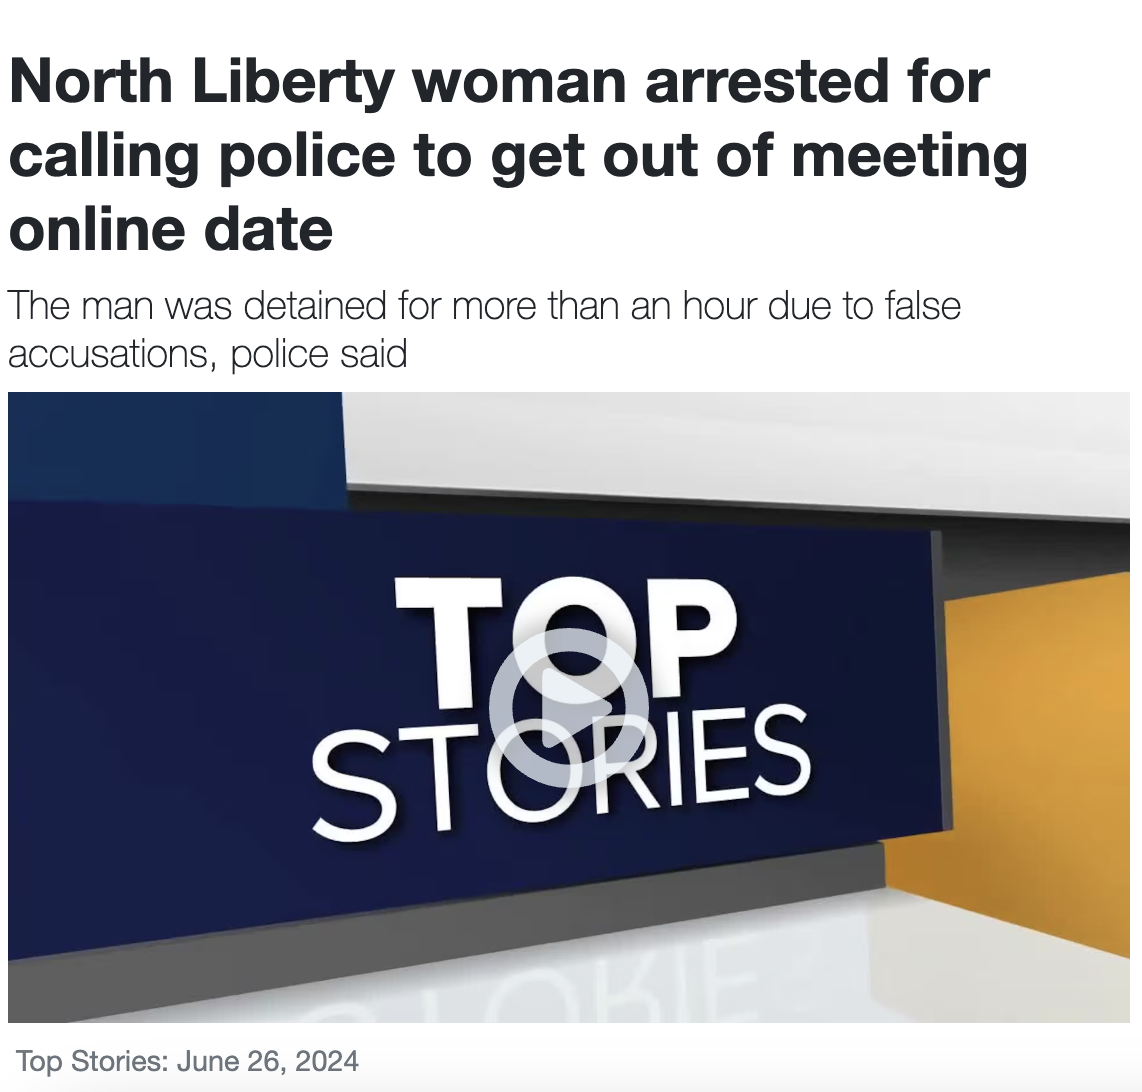 screenshot - North Liberty woman arrested for calling police to get out of meeting online date The man was detained for more than an hour due to false accusations, police said Top Stories Top Stories